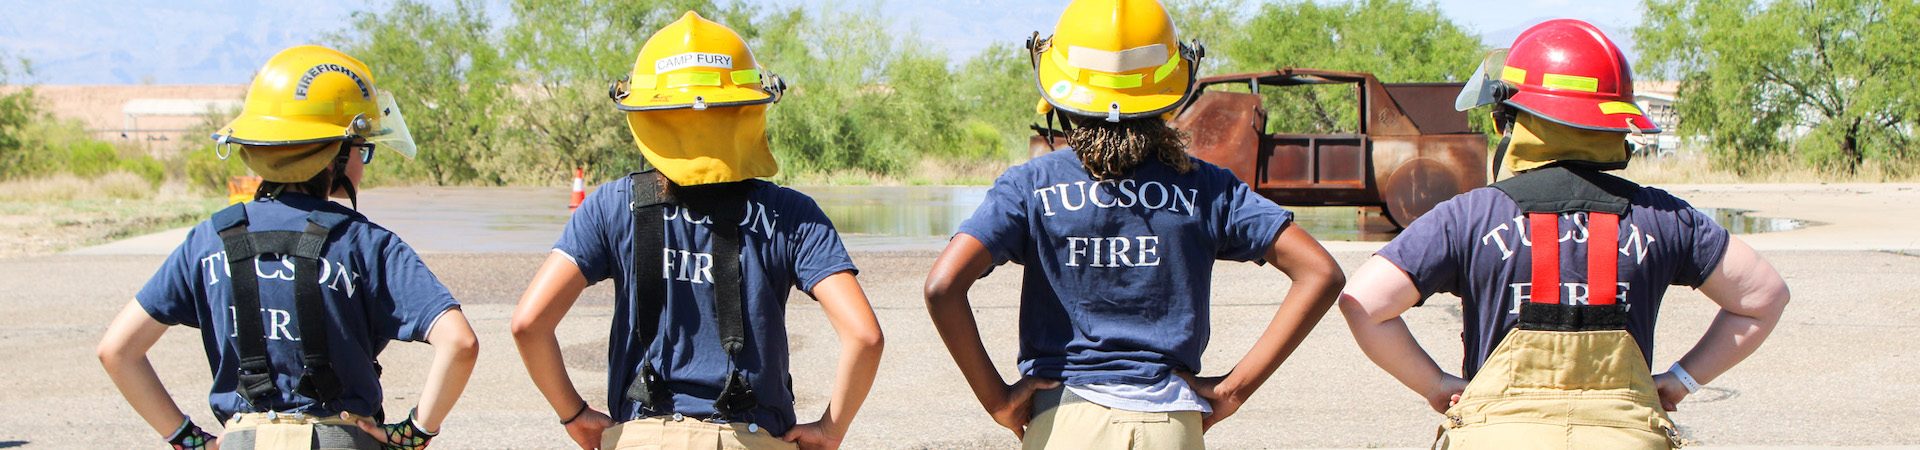  camp fury participants in fire fighter garb 